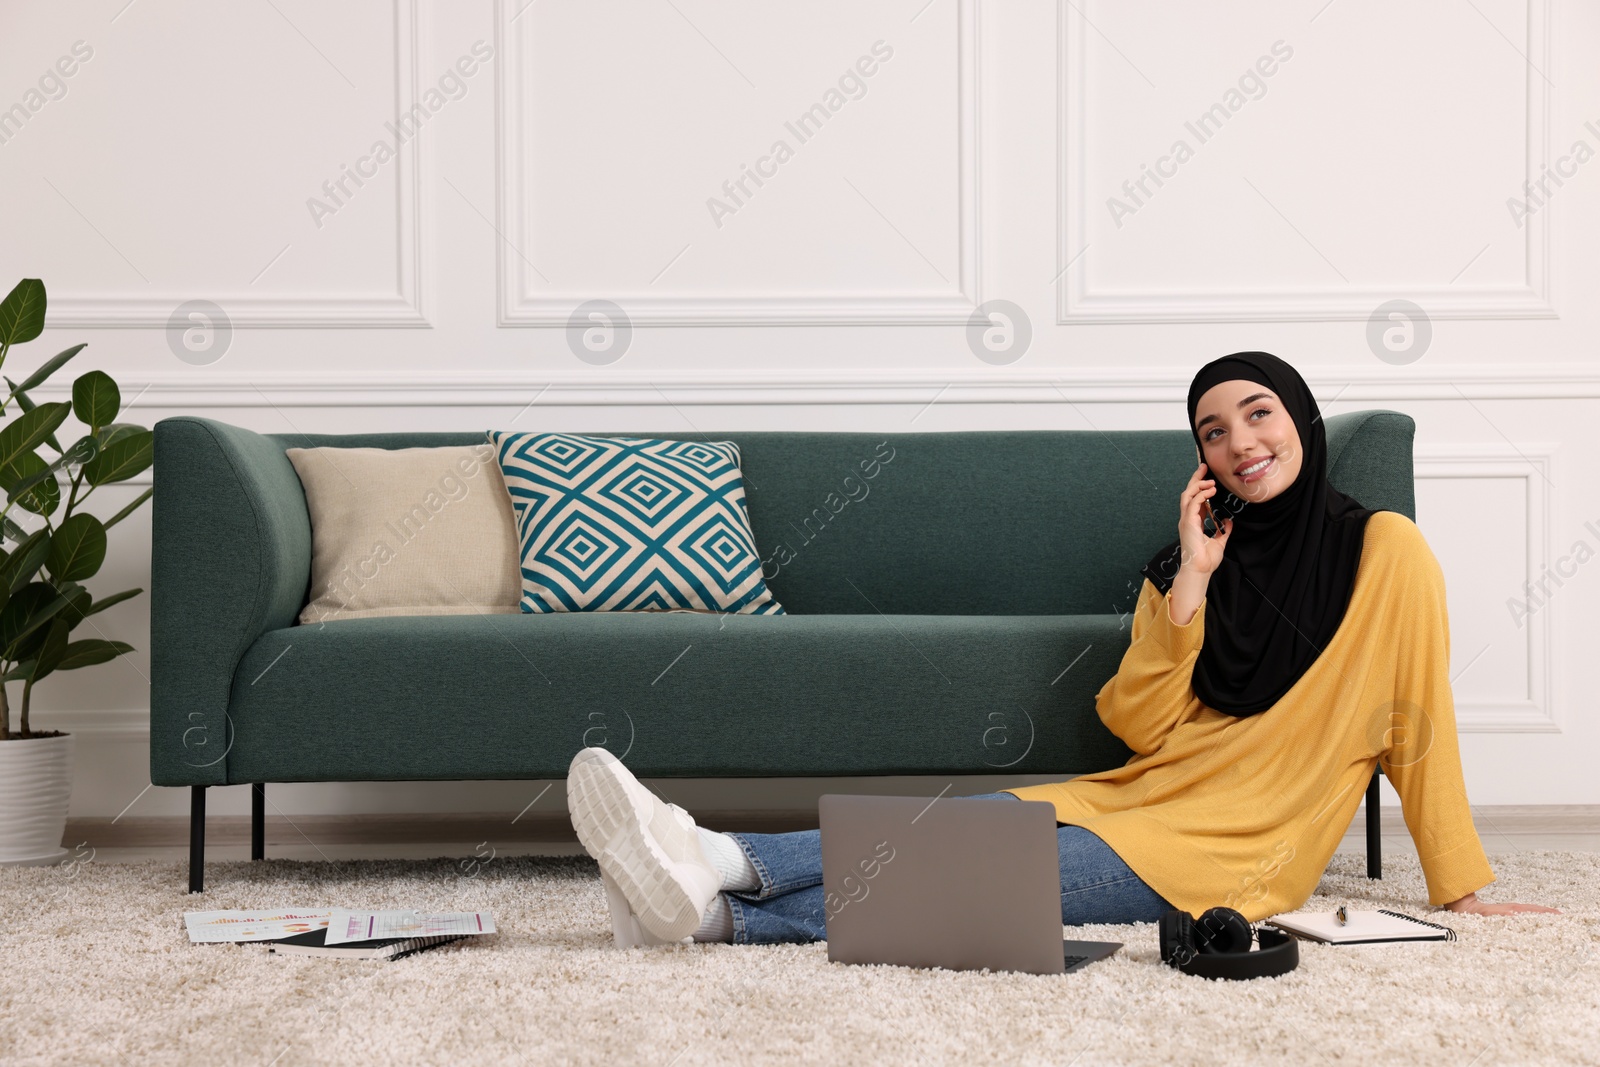 Photo of Muslim woman in hijab talking on smartphone near laptop on floor in room. Space for text